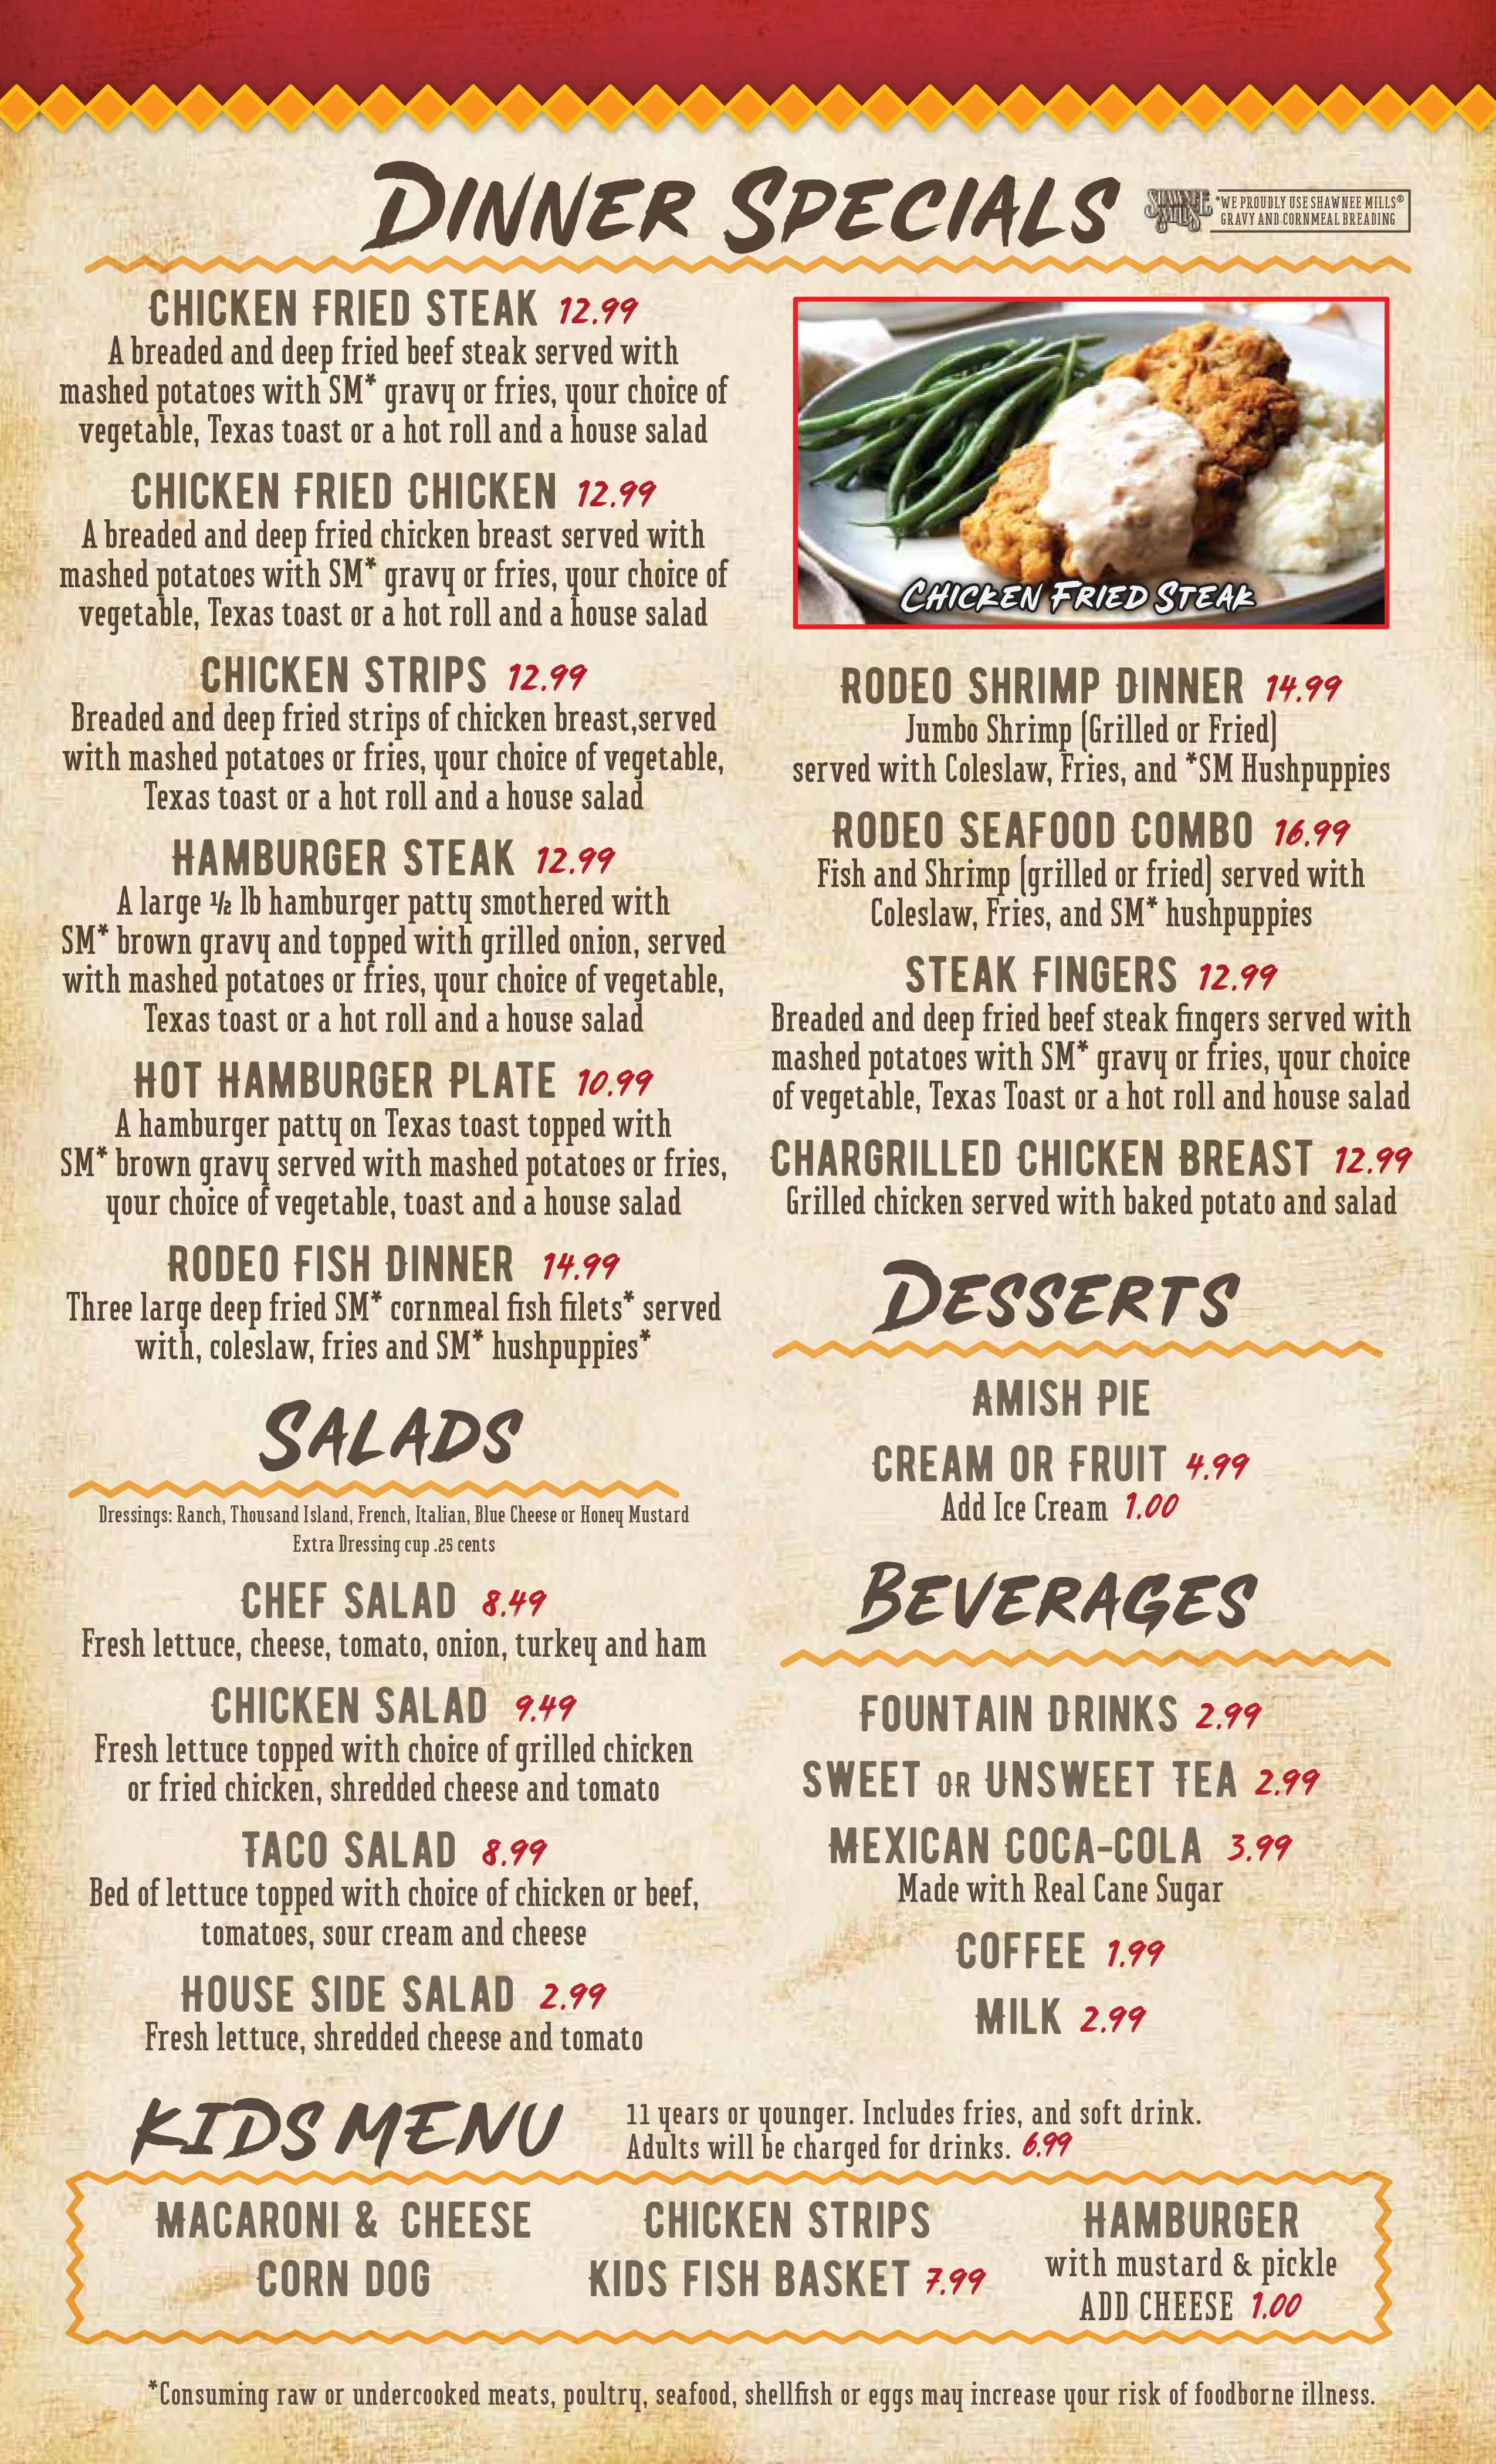 The Rodeo in Okmulgee Americano menu page with dinner specials.